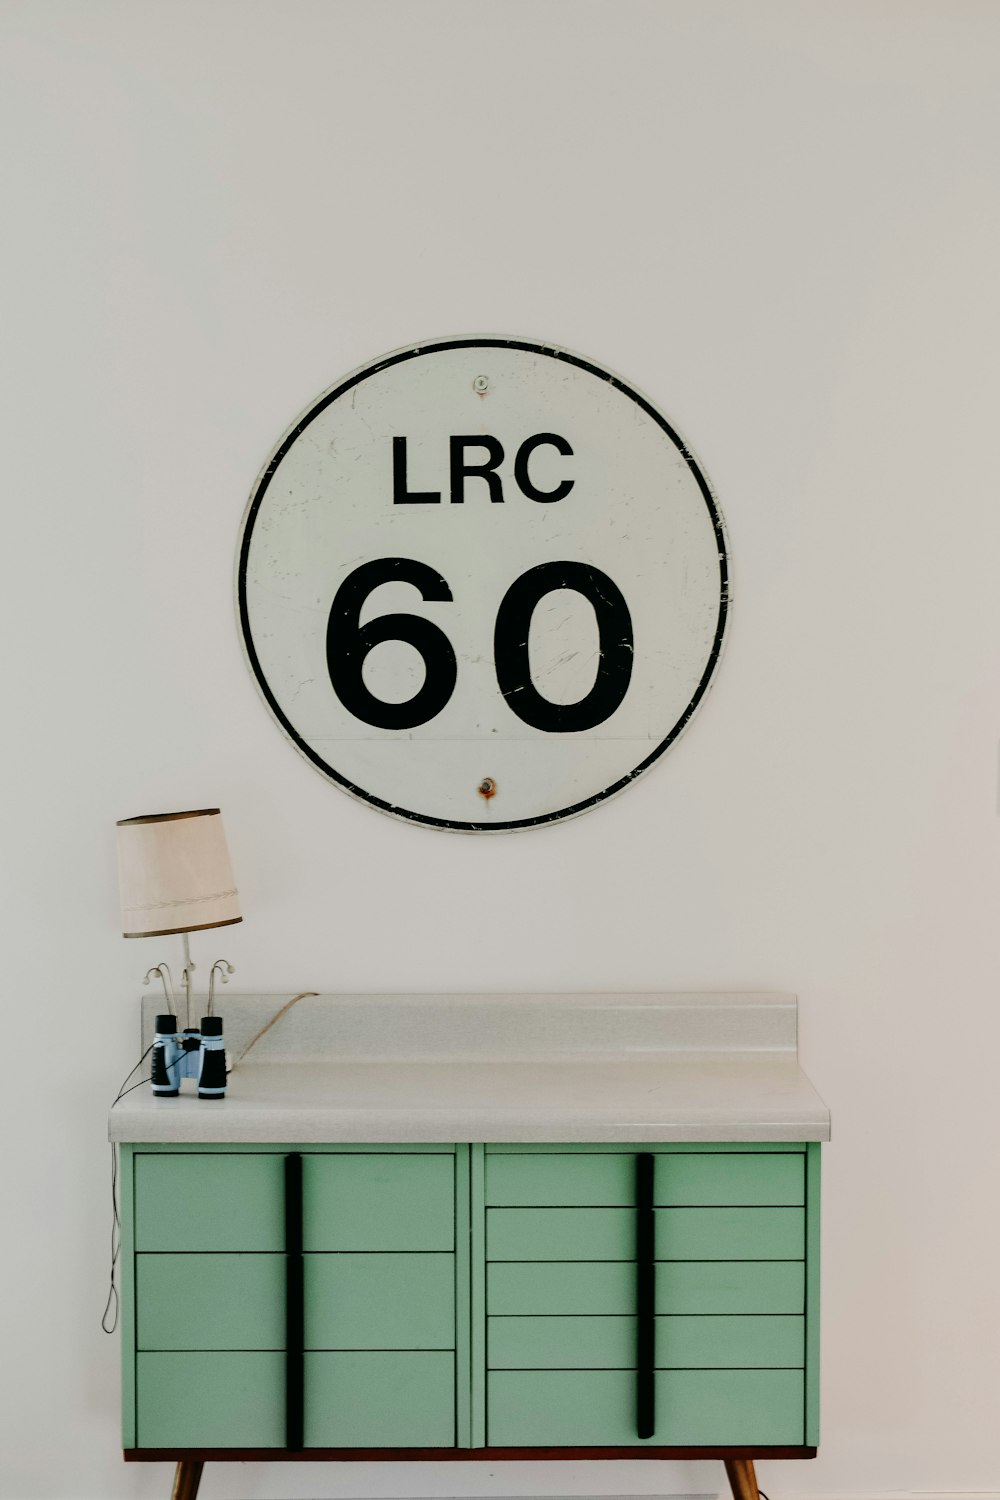 white and green wooden desk with brown lampshade near LRC 60 wall signage